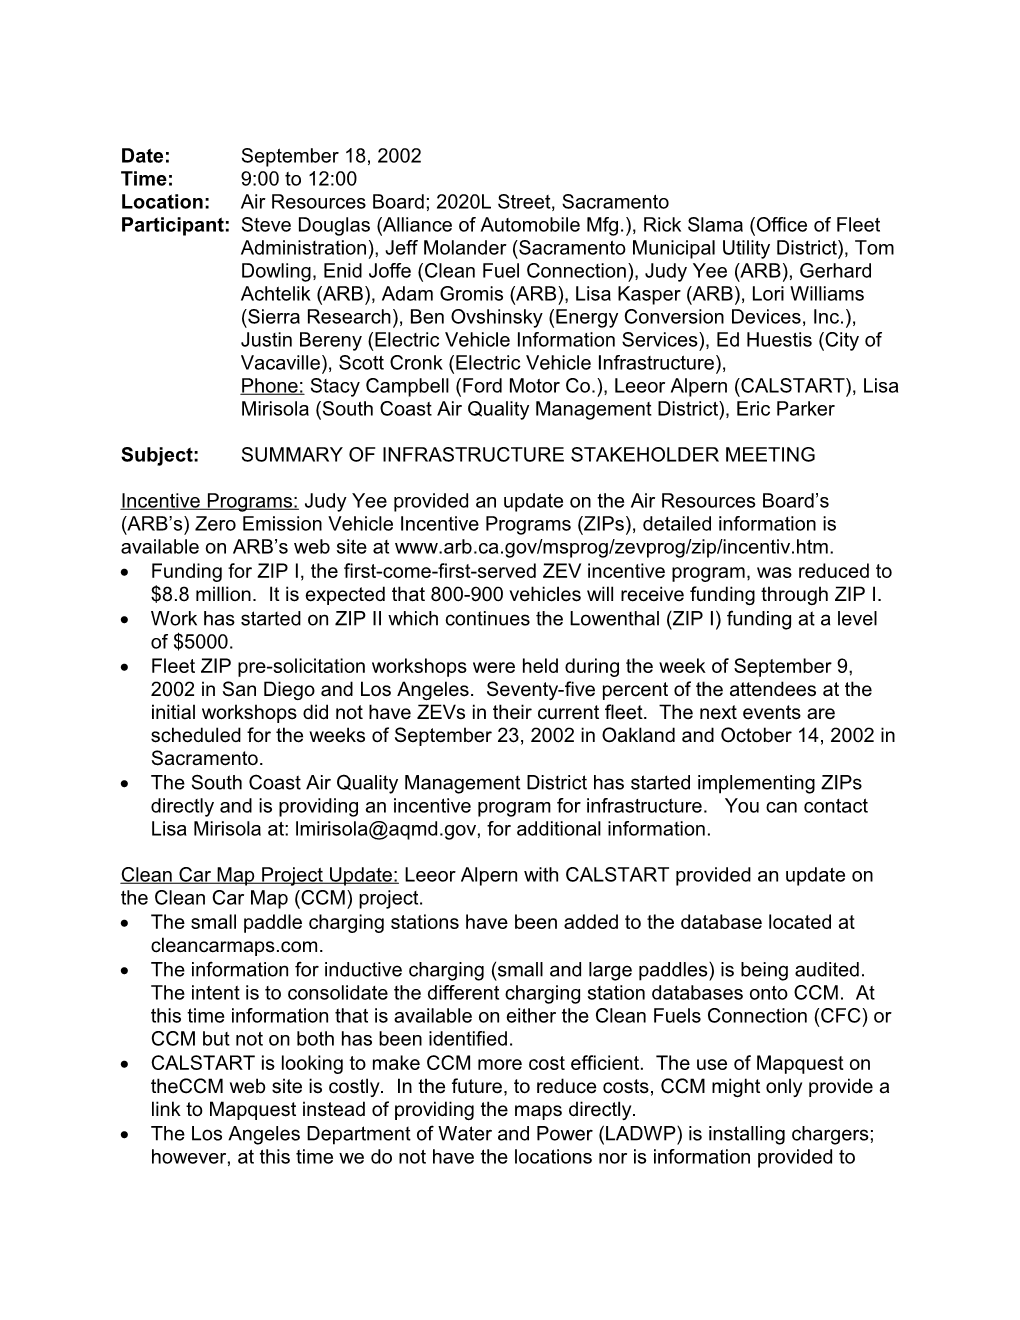 Meeting Summary for the September 18, 2002 ZEV Infrastructure Stakeholder Meeting